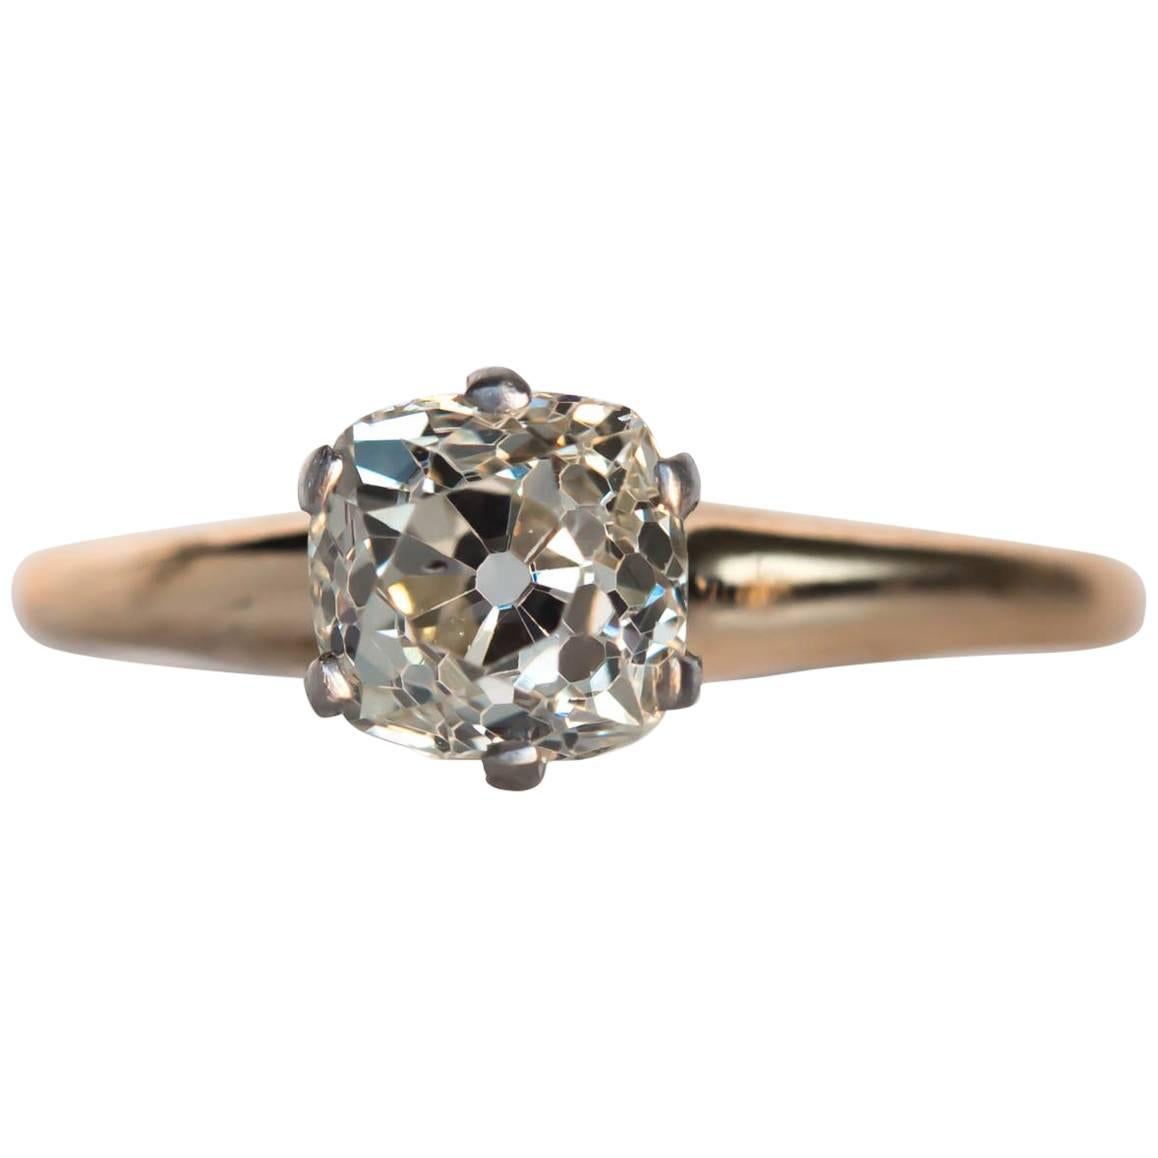 1900s Edwardian Yellow Gold and Platinum 1.26 Carat Diamond Engagement Ring For Sale